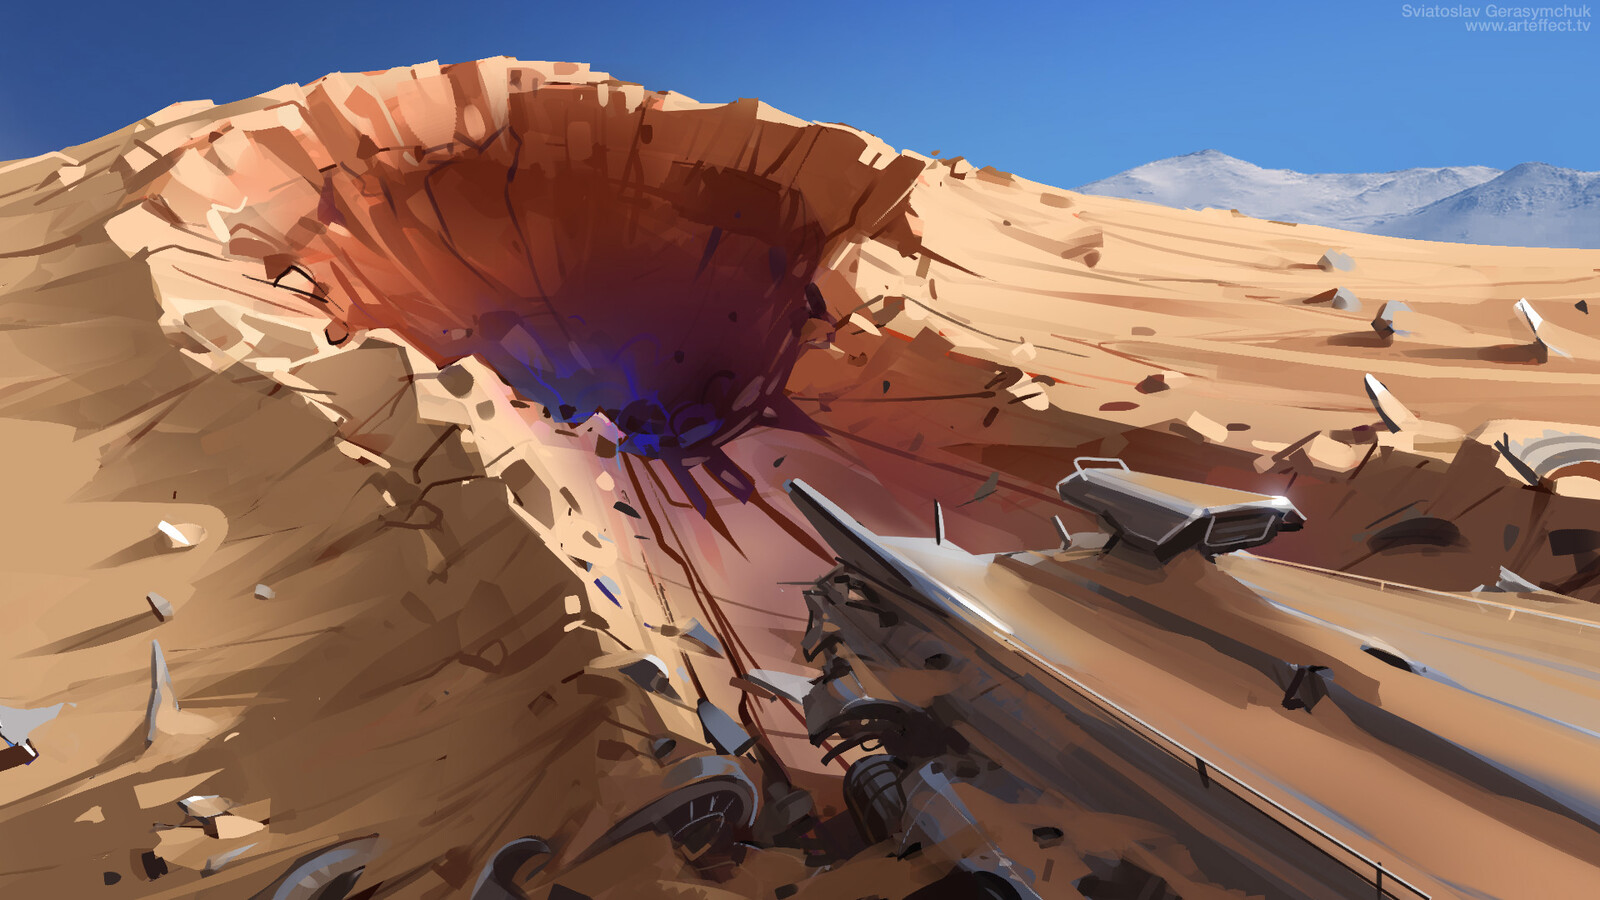 Crater from crashed spaceship